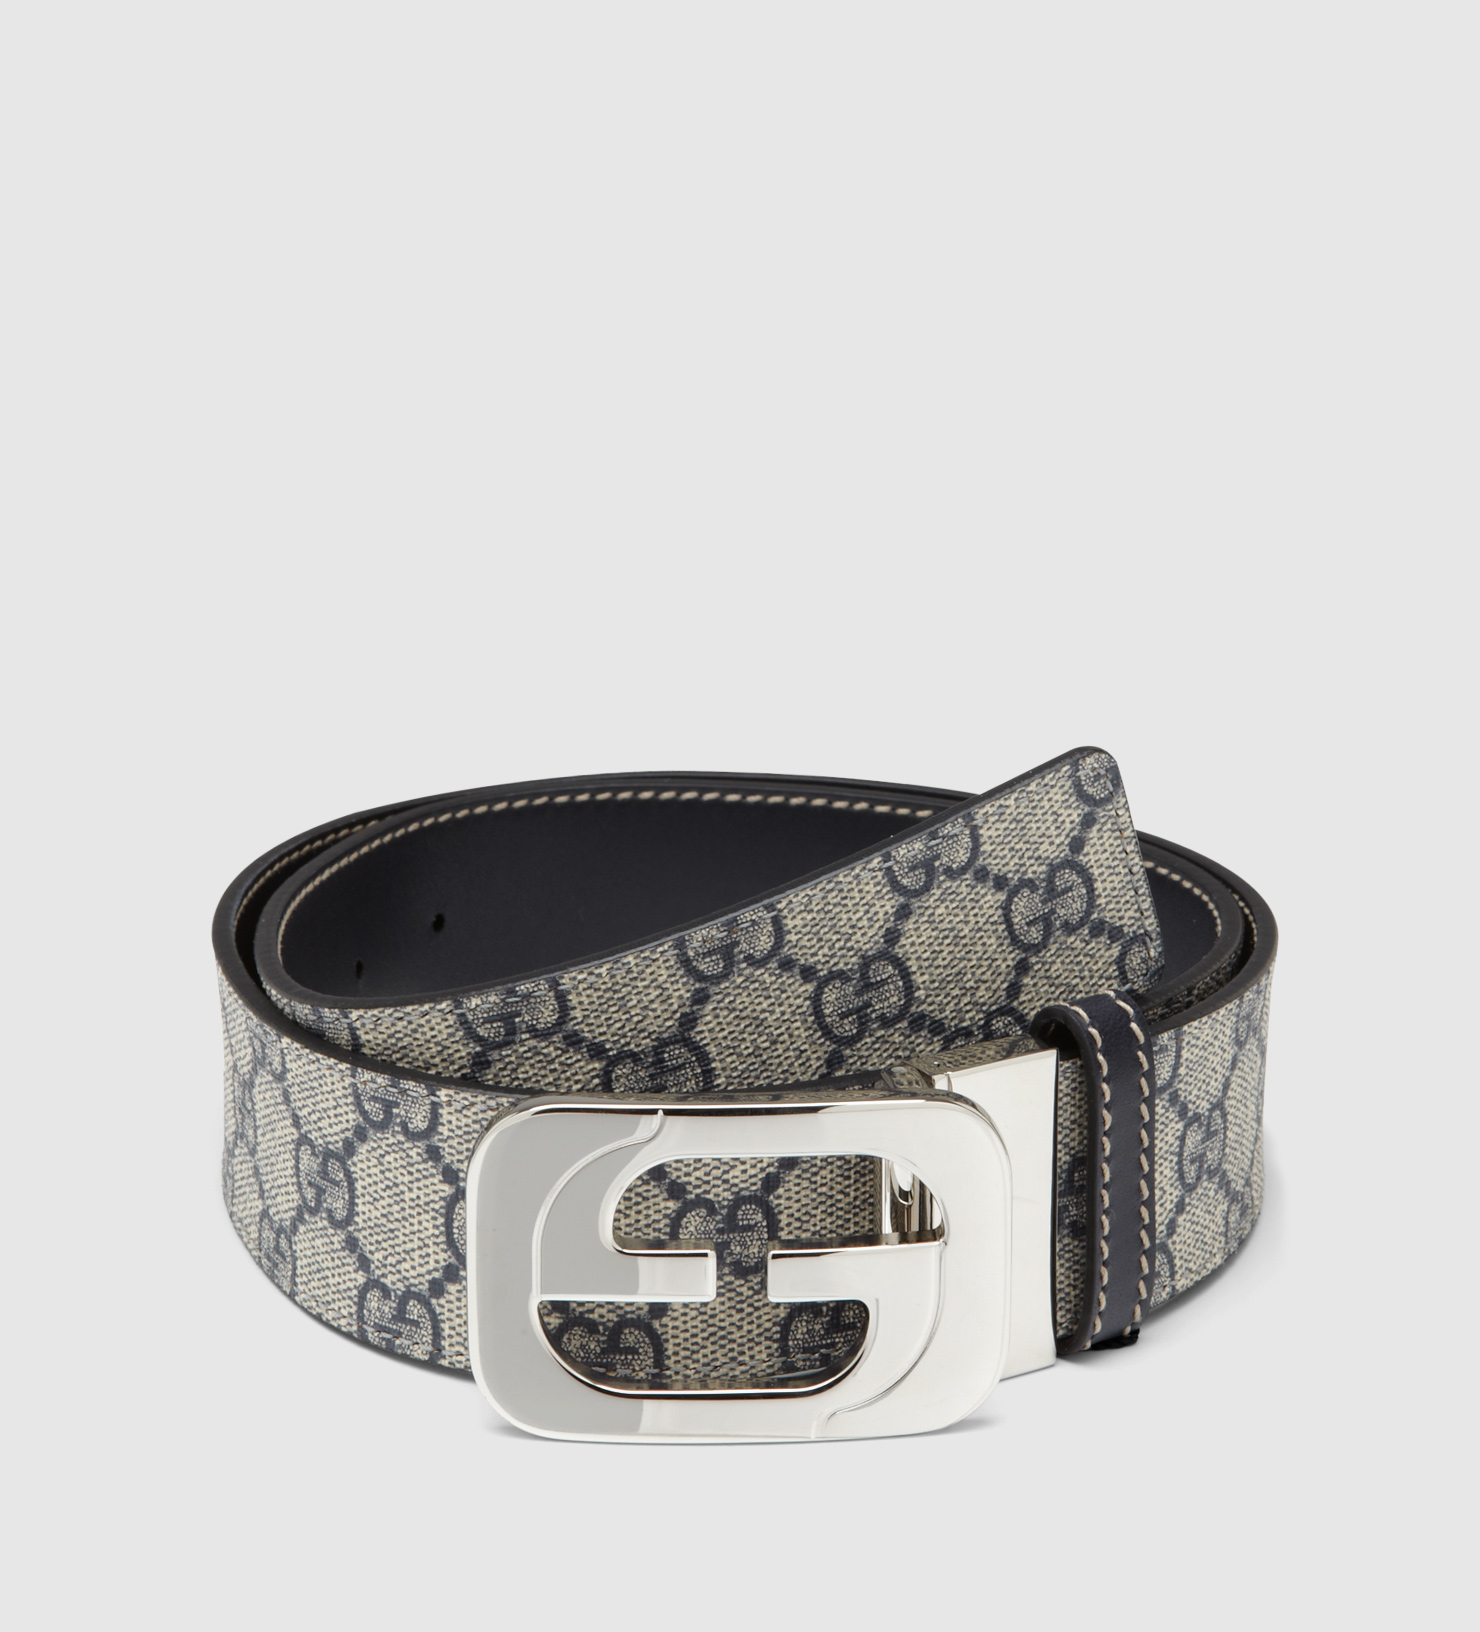 Lyst - Gucci Reversible Belt With Interlocking G Buckle in Gray for Men